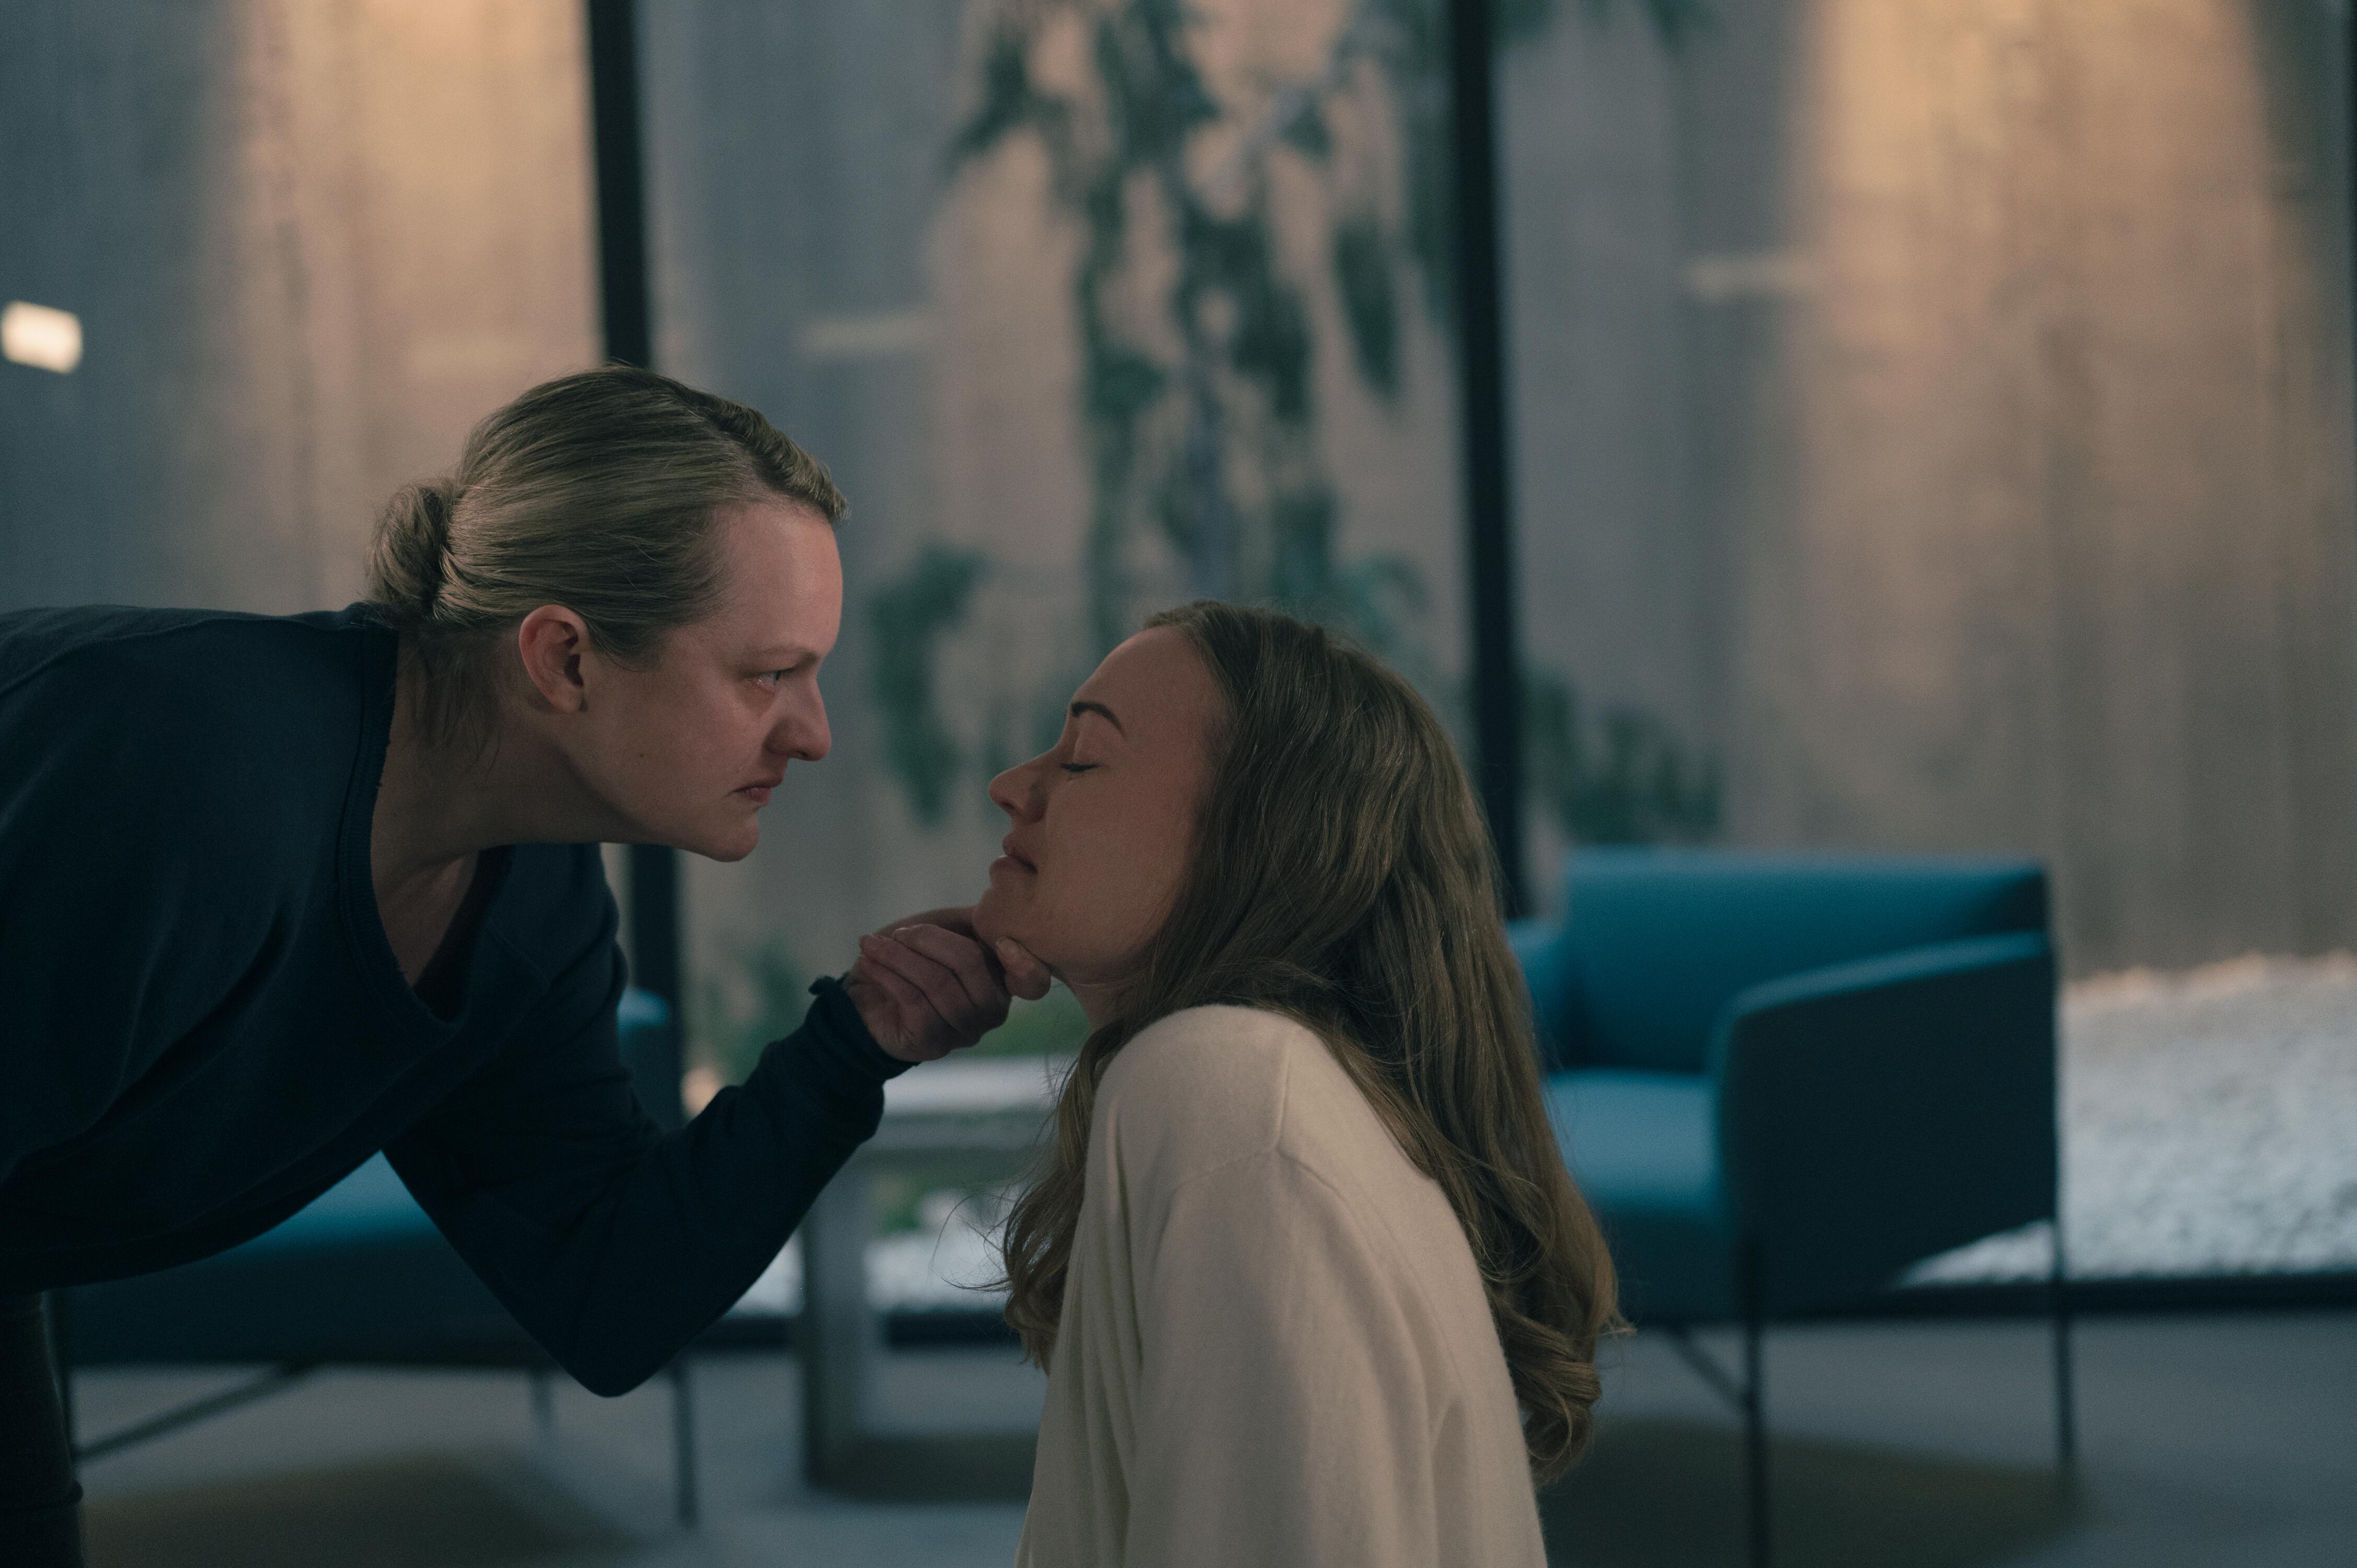 ‘The Handmaid’s Tale’: Serena Joy Will Be a Problem for June in Season 5 According to Elisabeth Moss